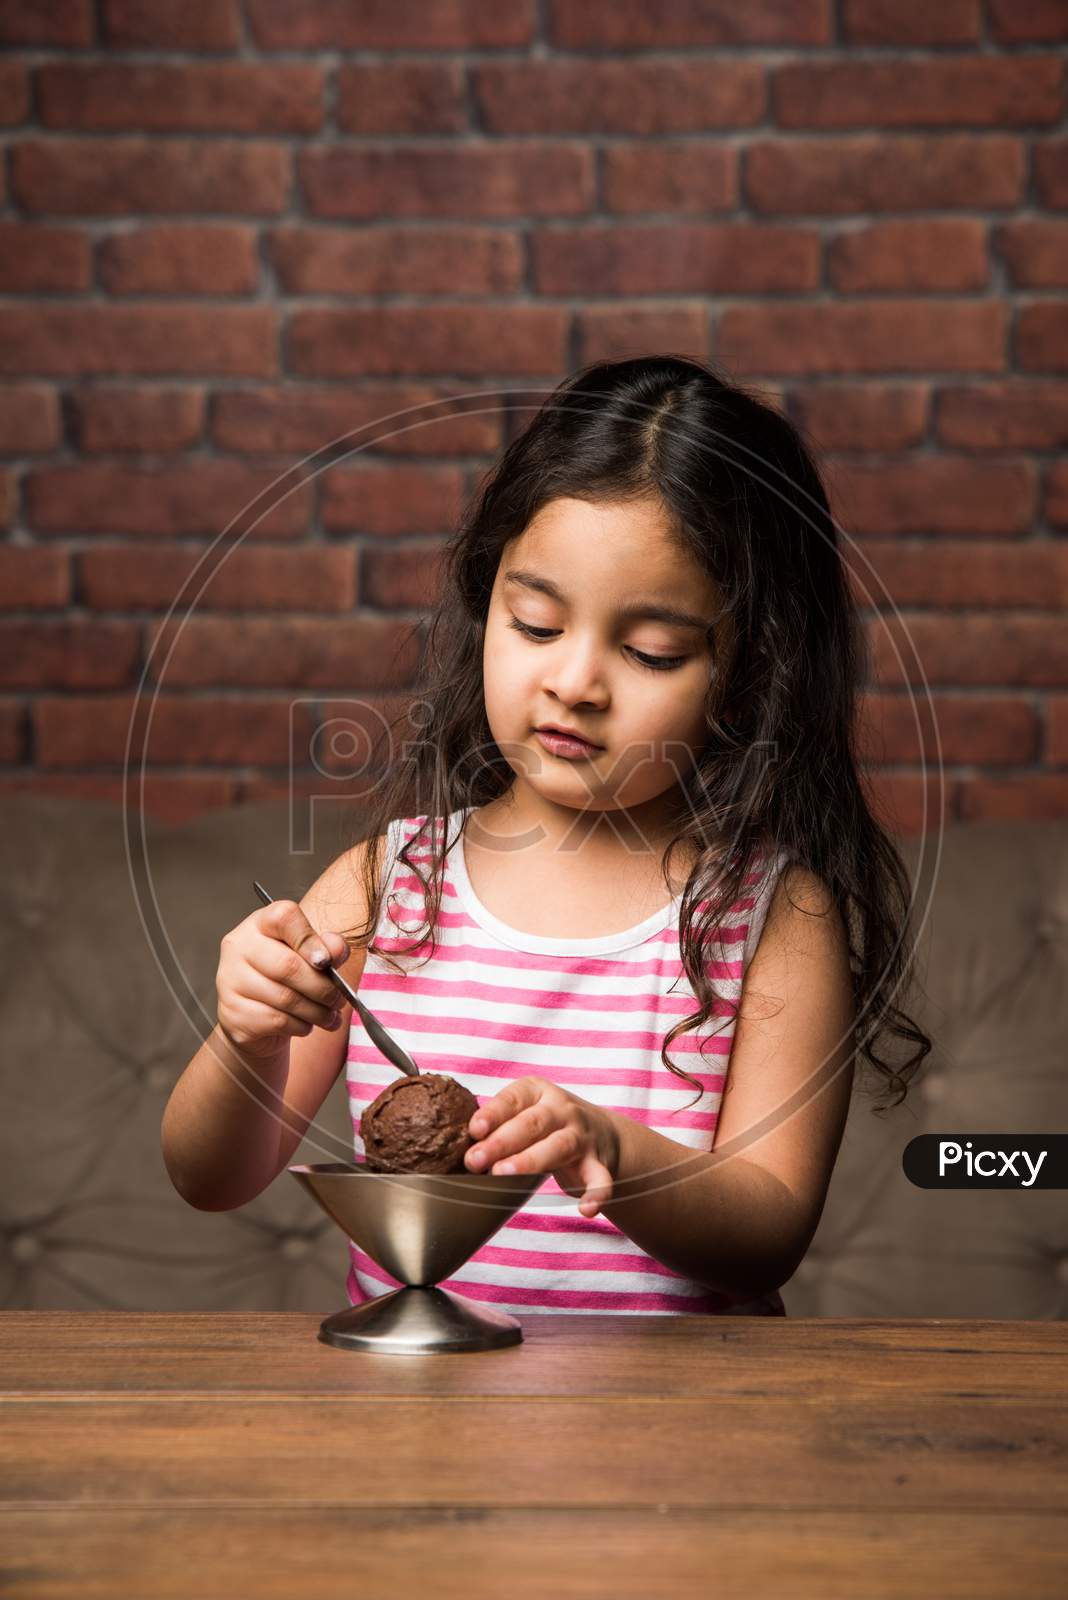 Indian Small girl eating Ice Cream in a bowl